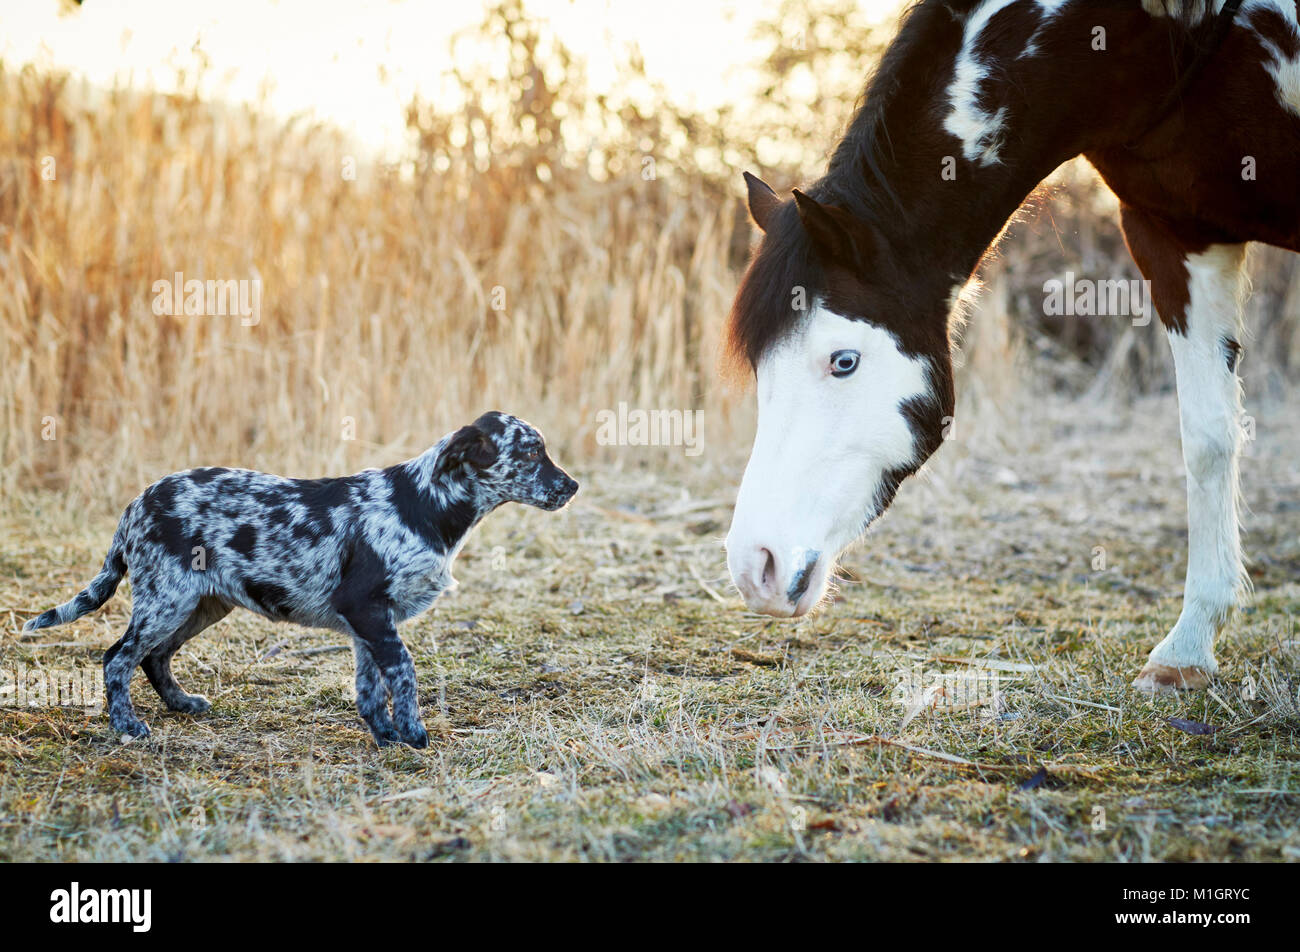 Animal friendship: Pintabian and young mixed-breed dog interacting. Germany Stock Photo